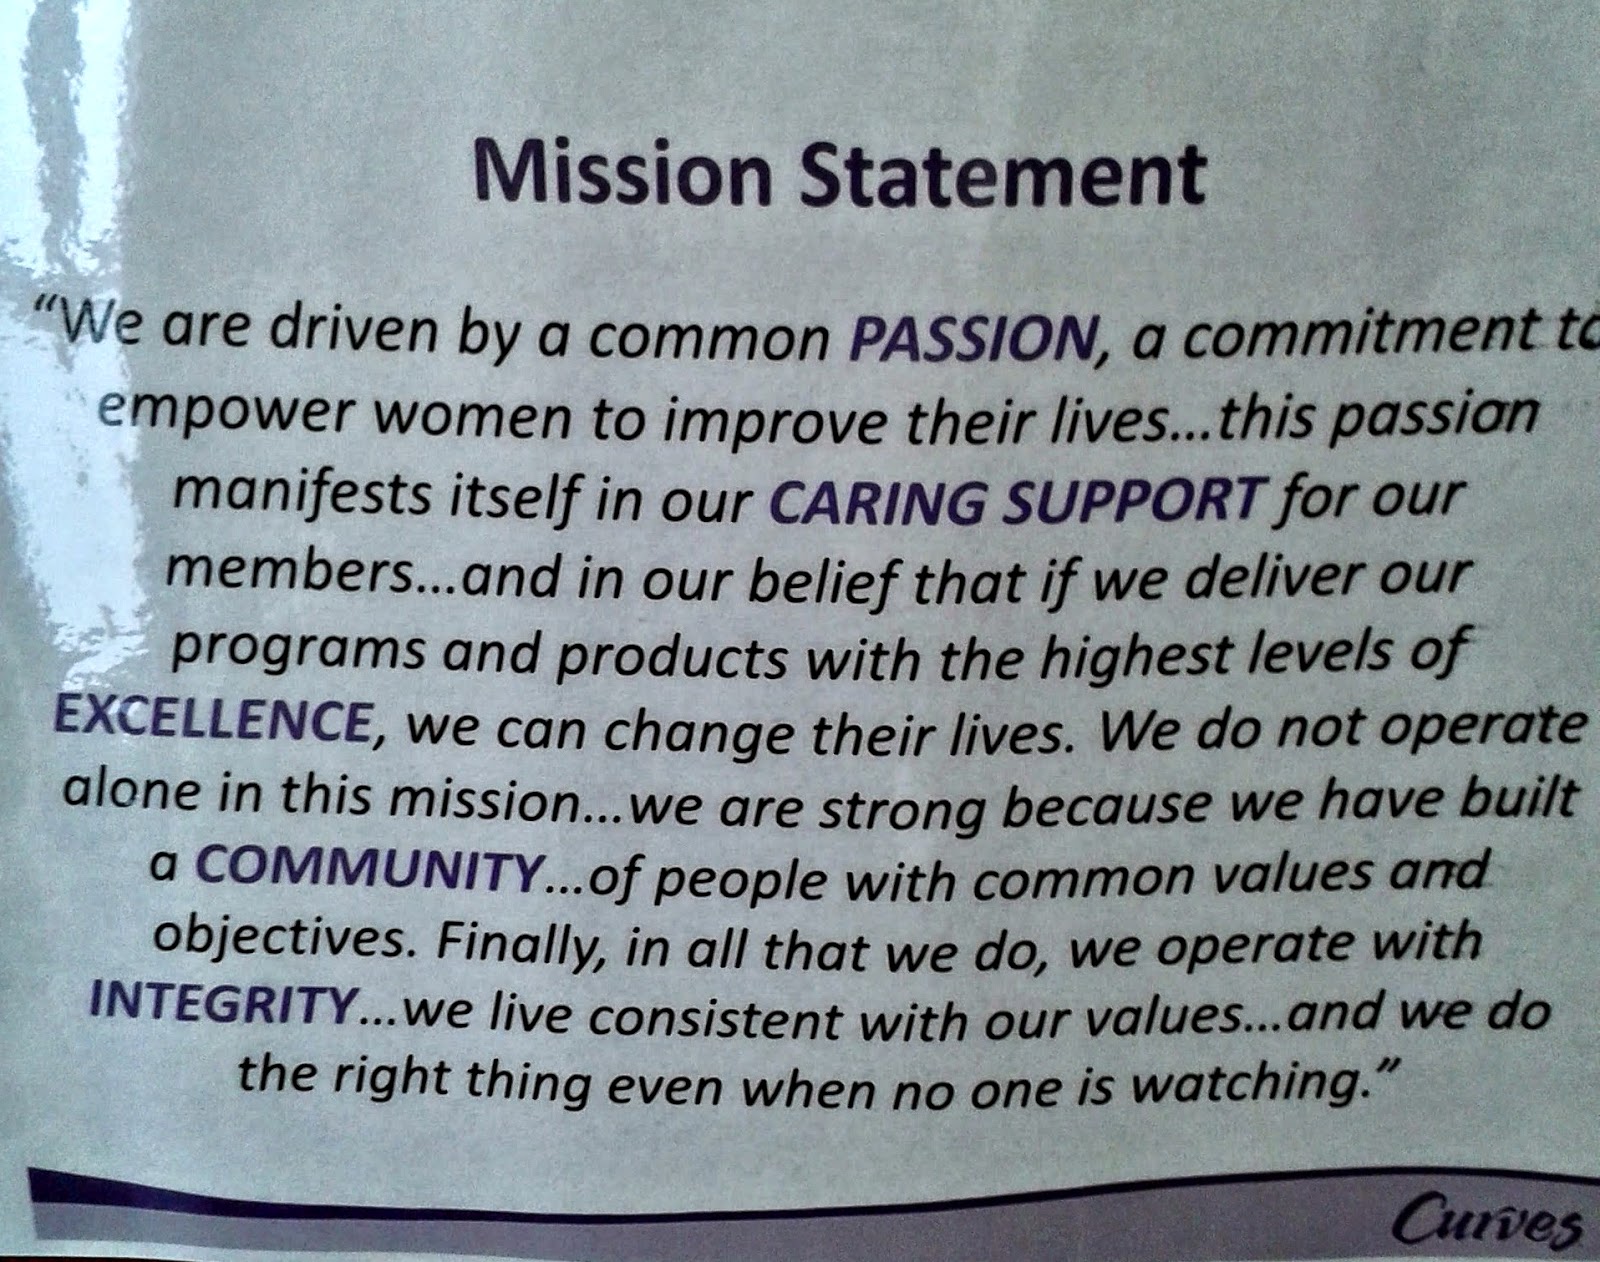 The Curves mission statement.